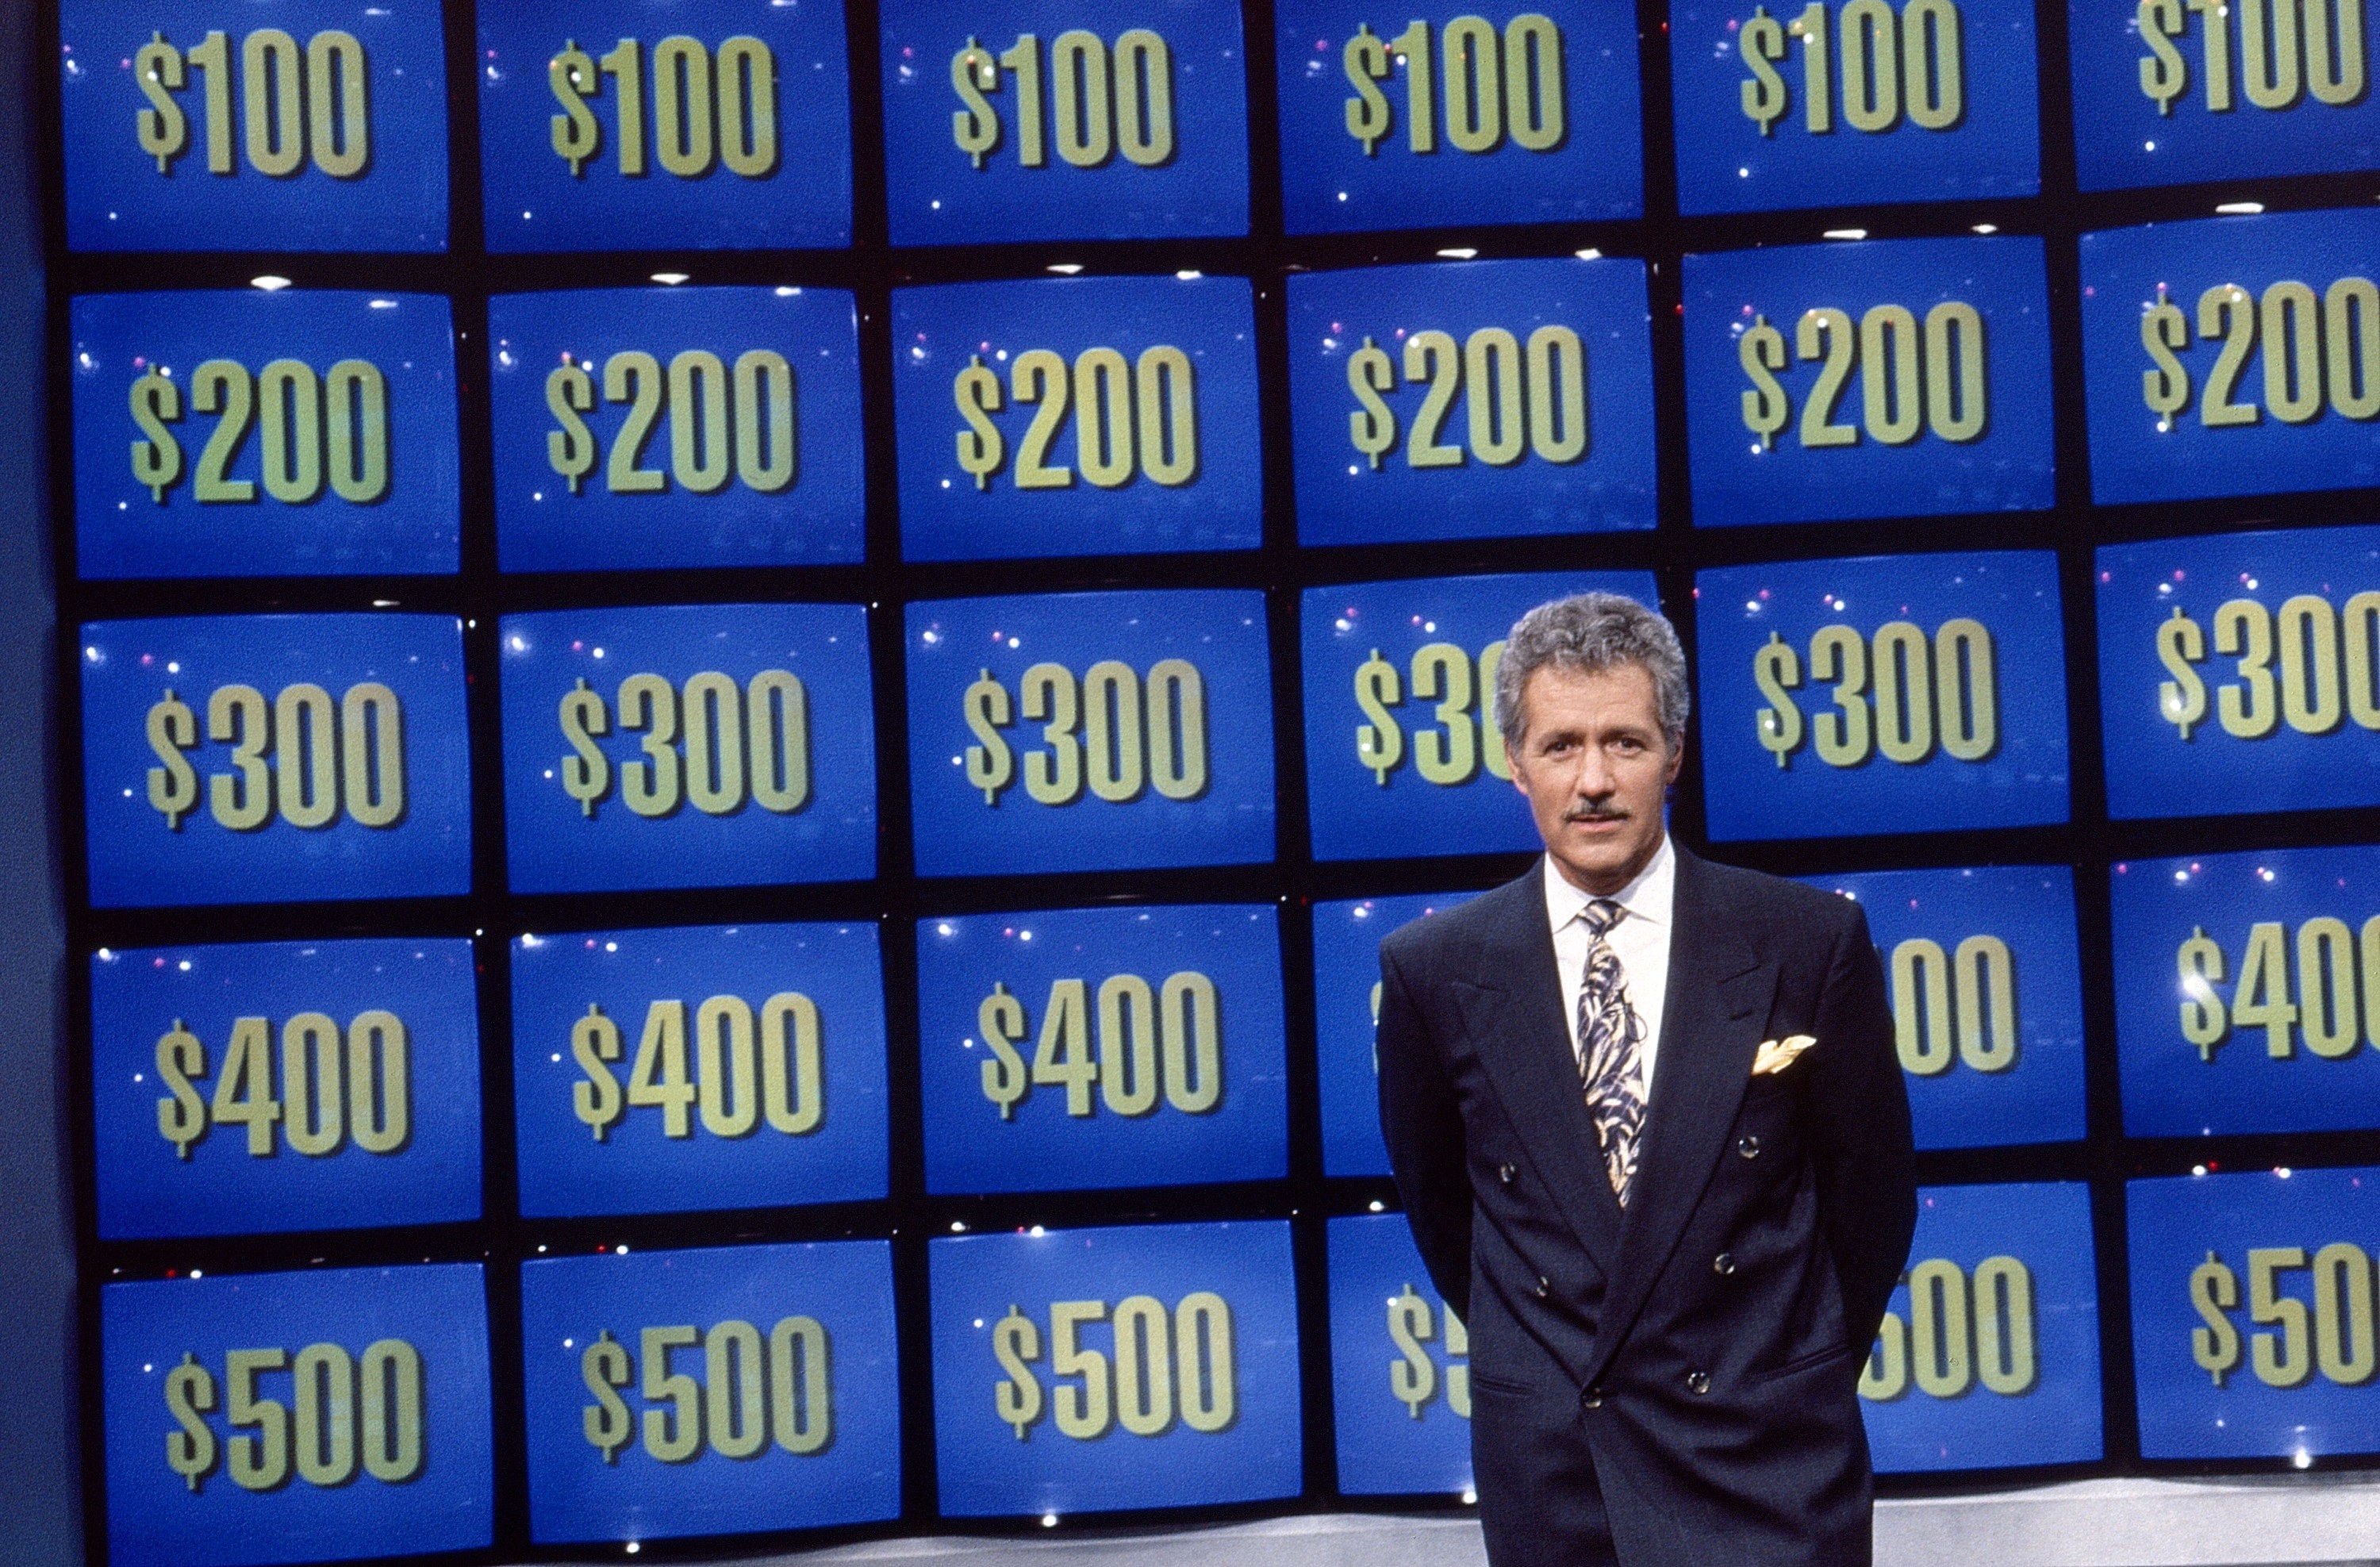 Alex Trebek in front of the game board